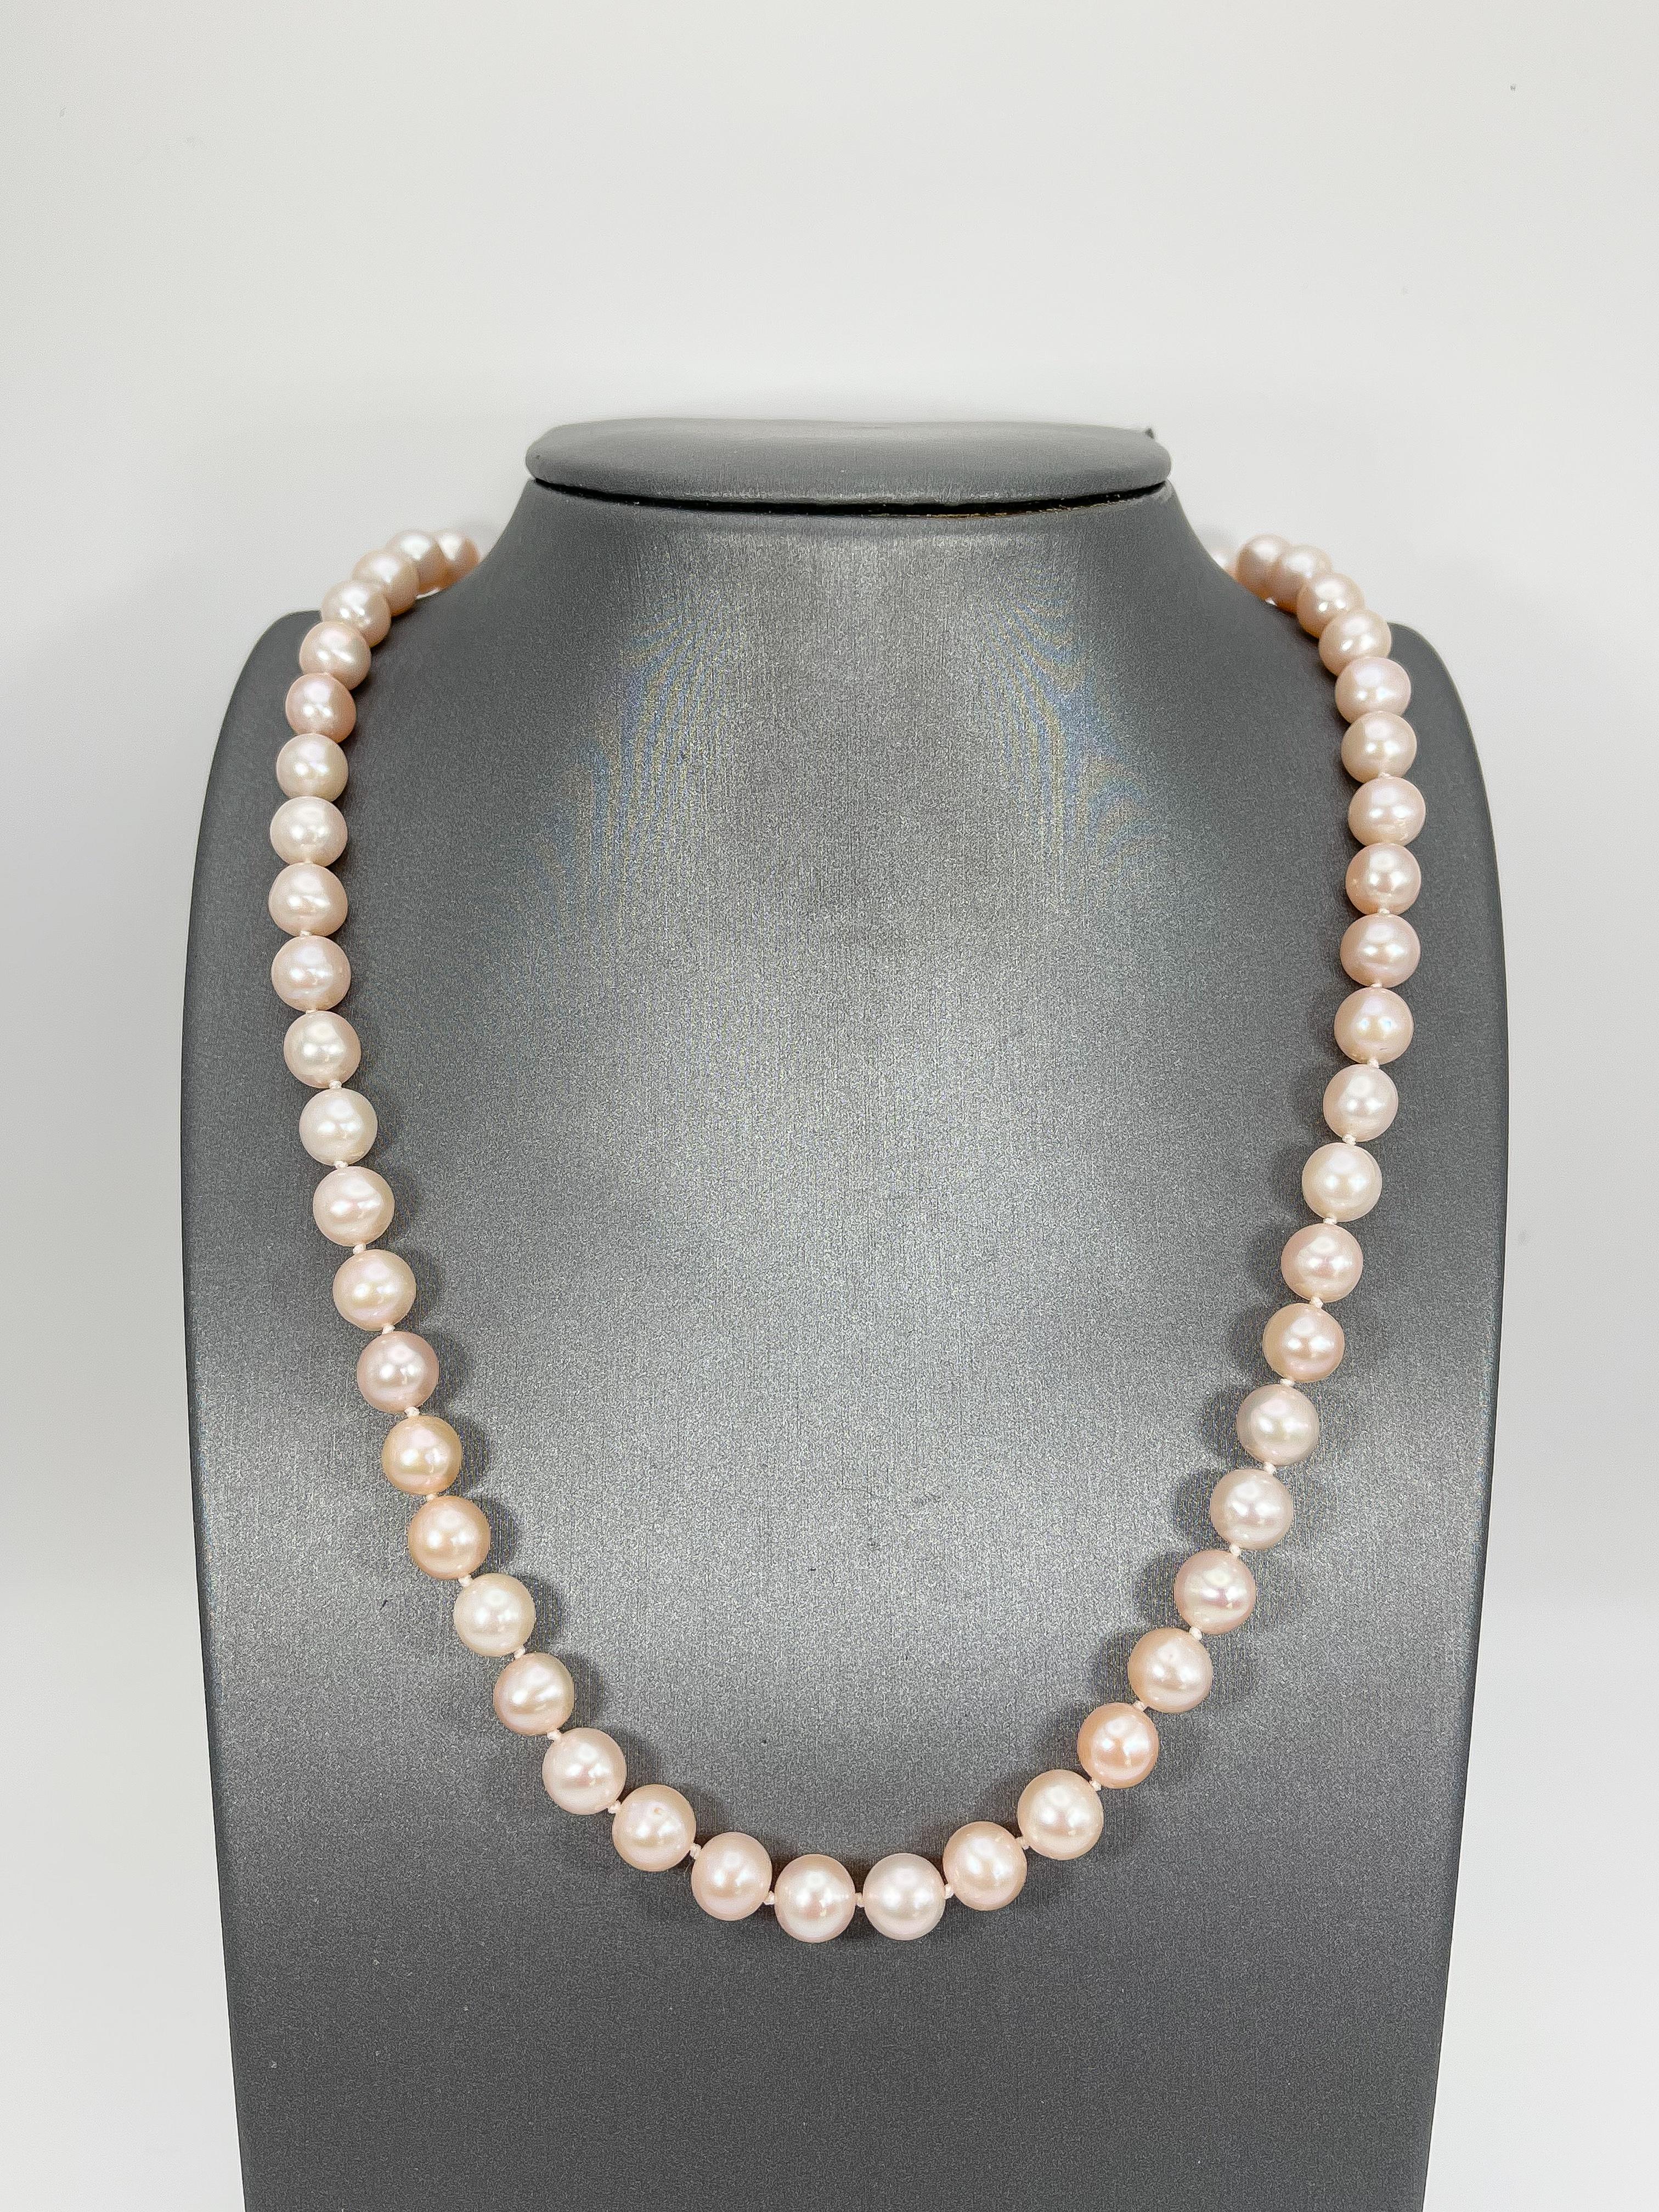 14k yellow gold light pink pearl necklace. This necklace  is 19 inches, the width is 7-7.75 mm, has a pearl clasp to open and close, and it has a total weight of 36.46 grams.